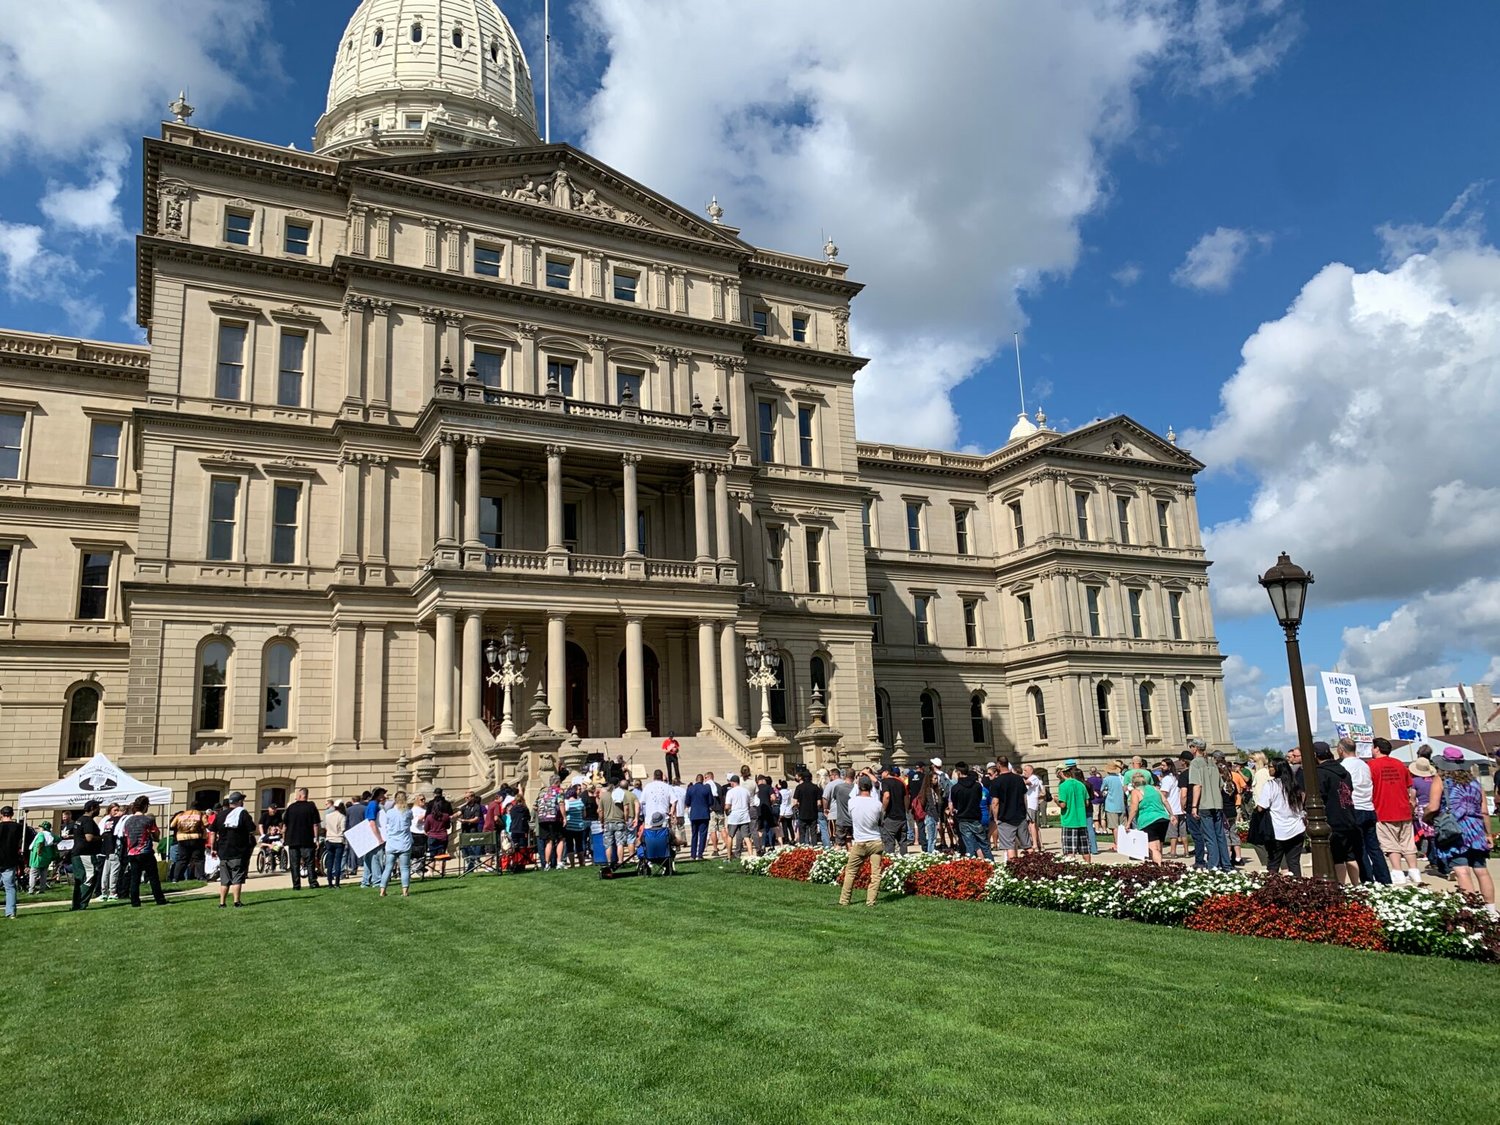 Protestors rallied on the capital lawn Wednesday against the proposed Michigan Cannabis Safety Act.